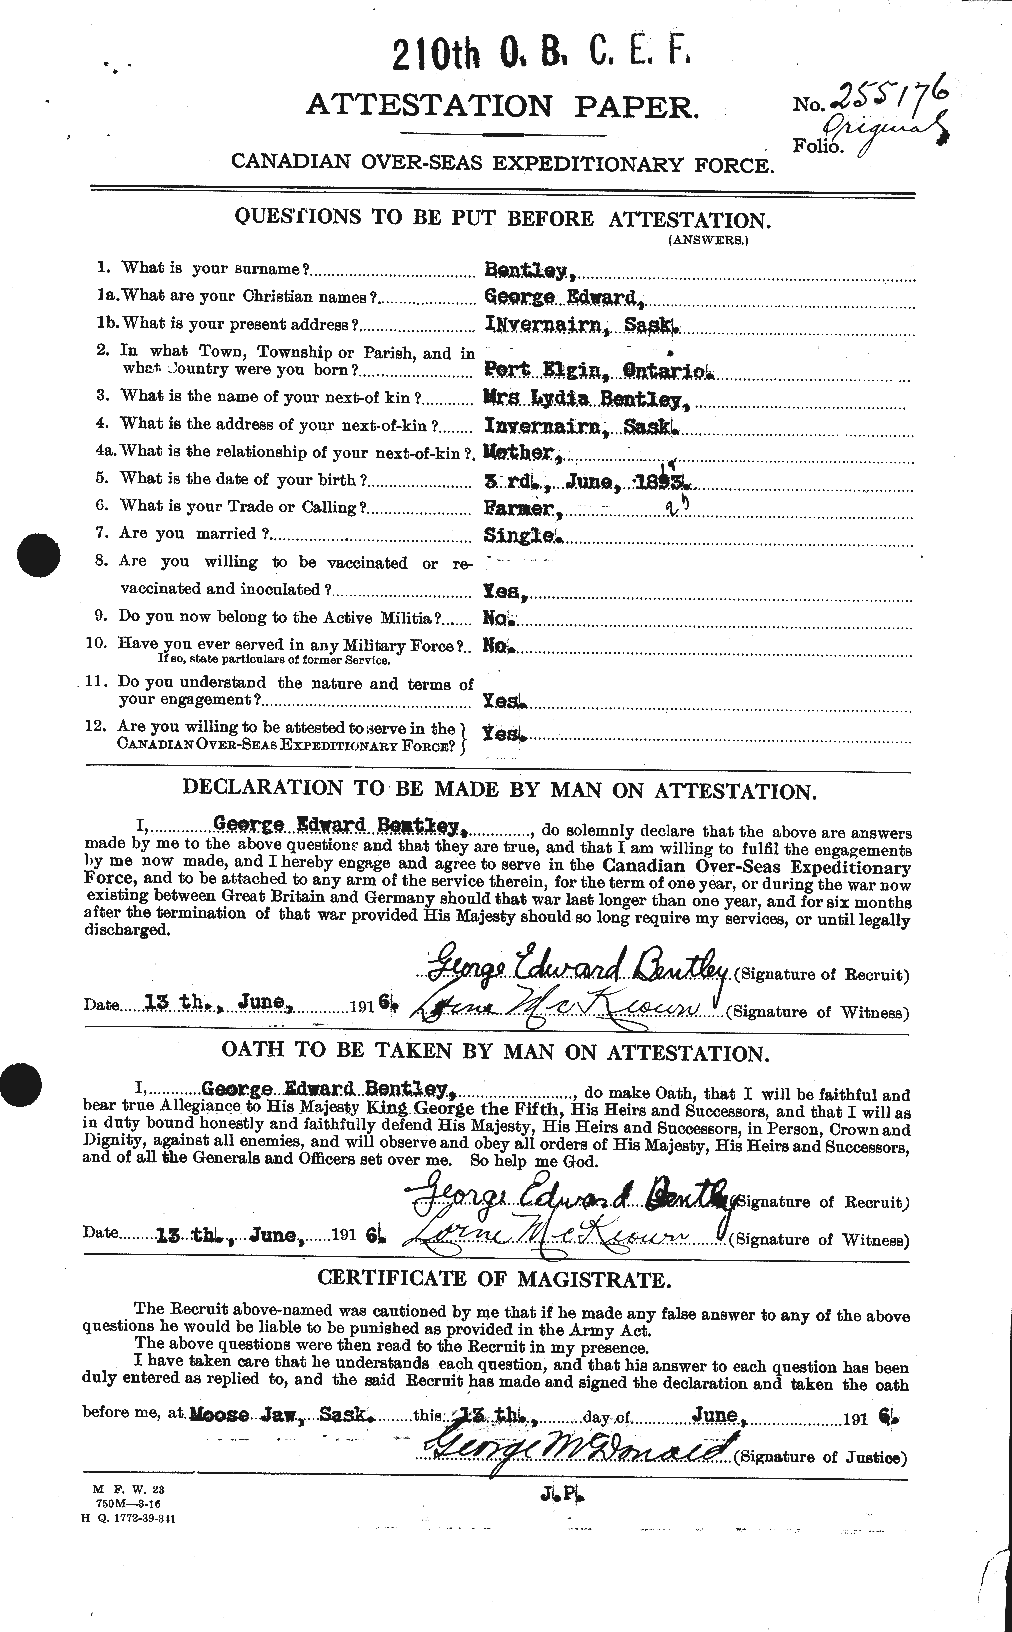 Personnel Records of the First World War - CEF 237917a